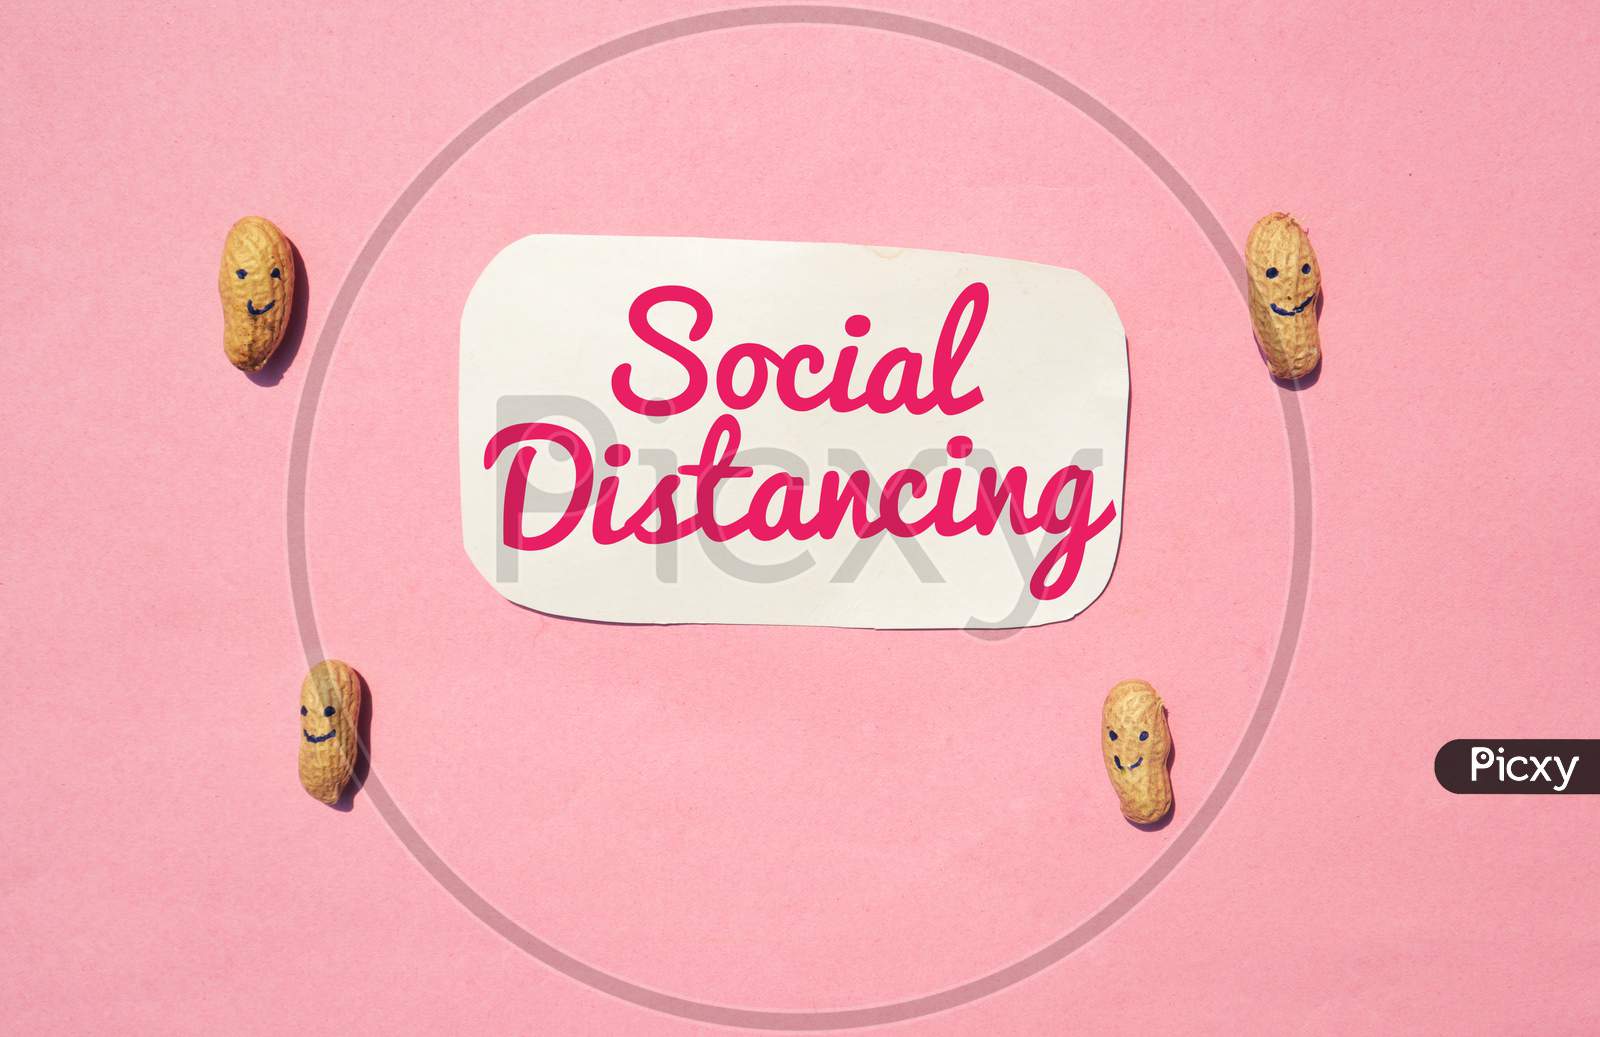 Social Distancing Or Safe Distance Conceptual Photo Due To Coronavirus Or Covid-19 With Peanuts Made Characters On Pink Background